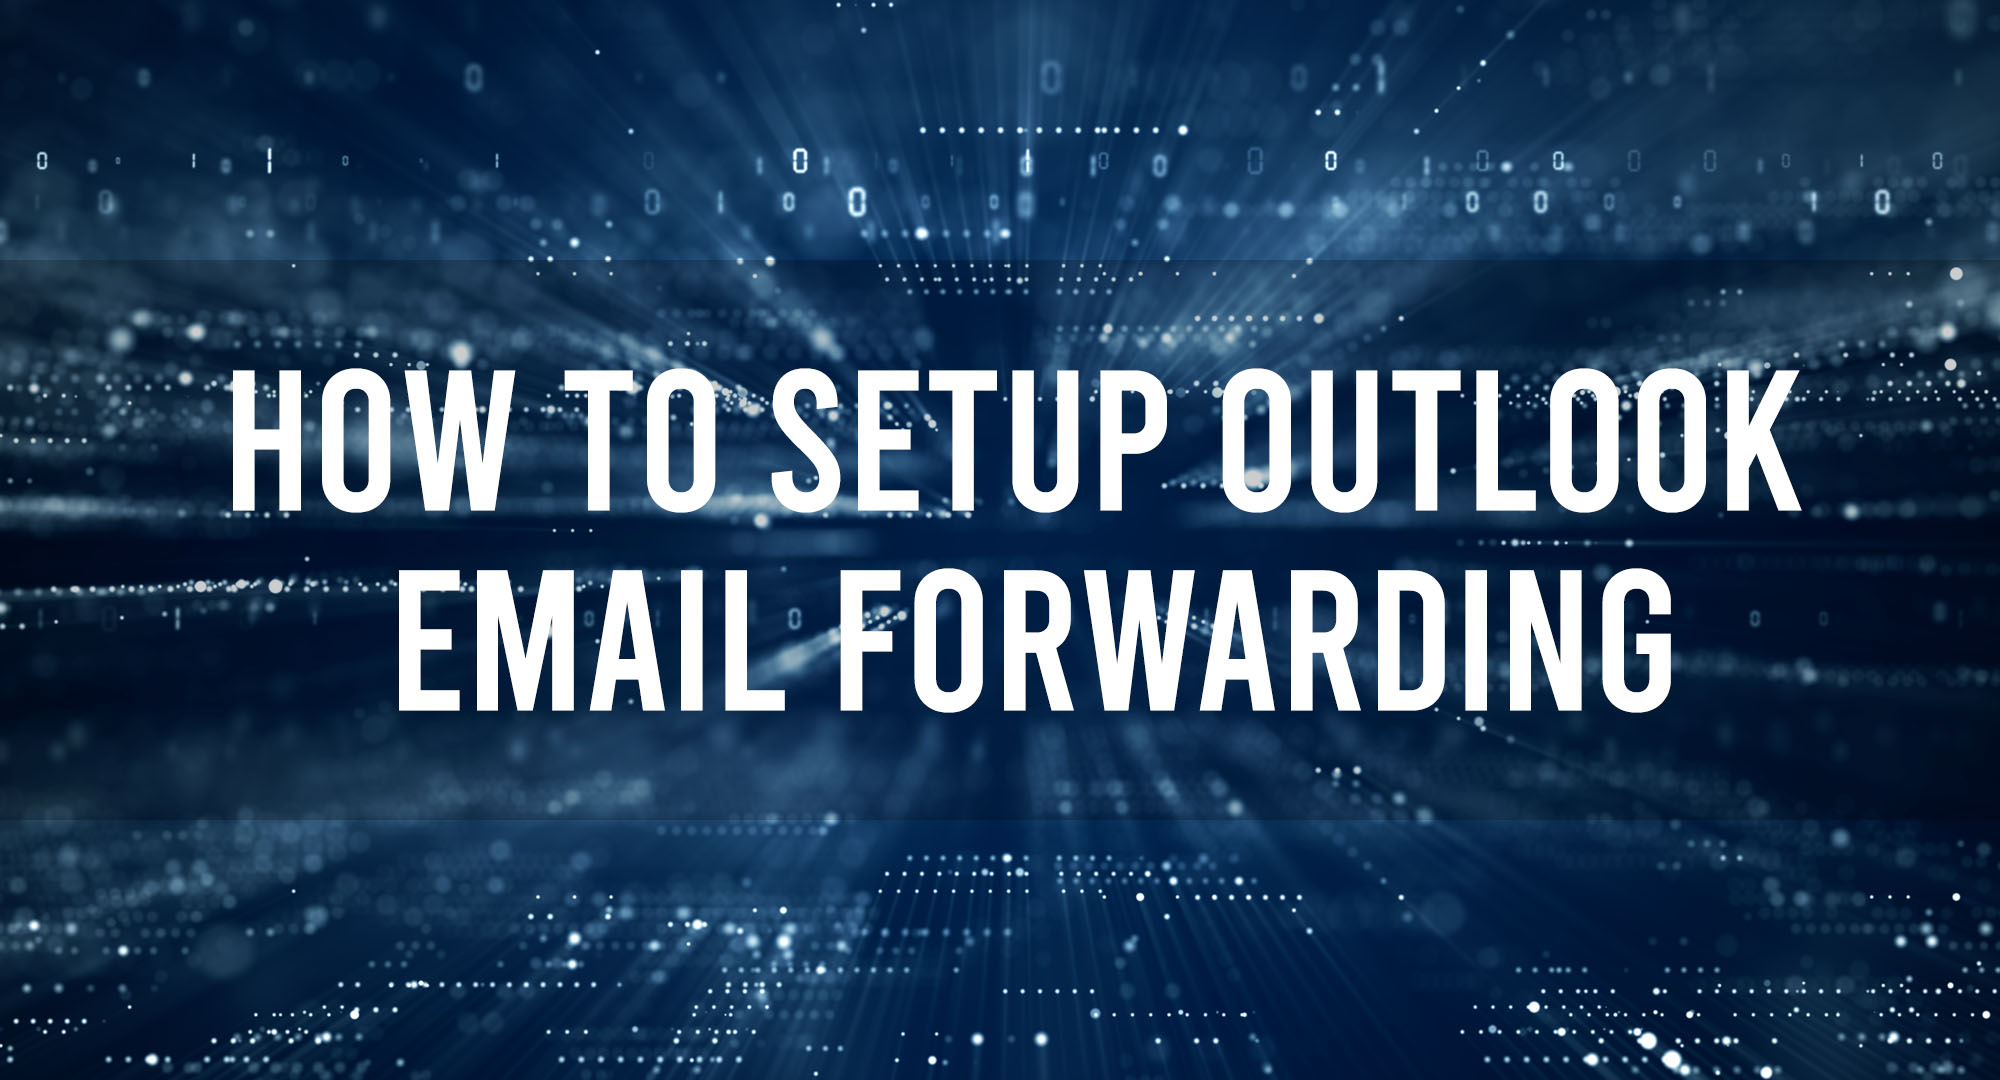 How to setup outlook email forwarding